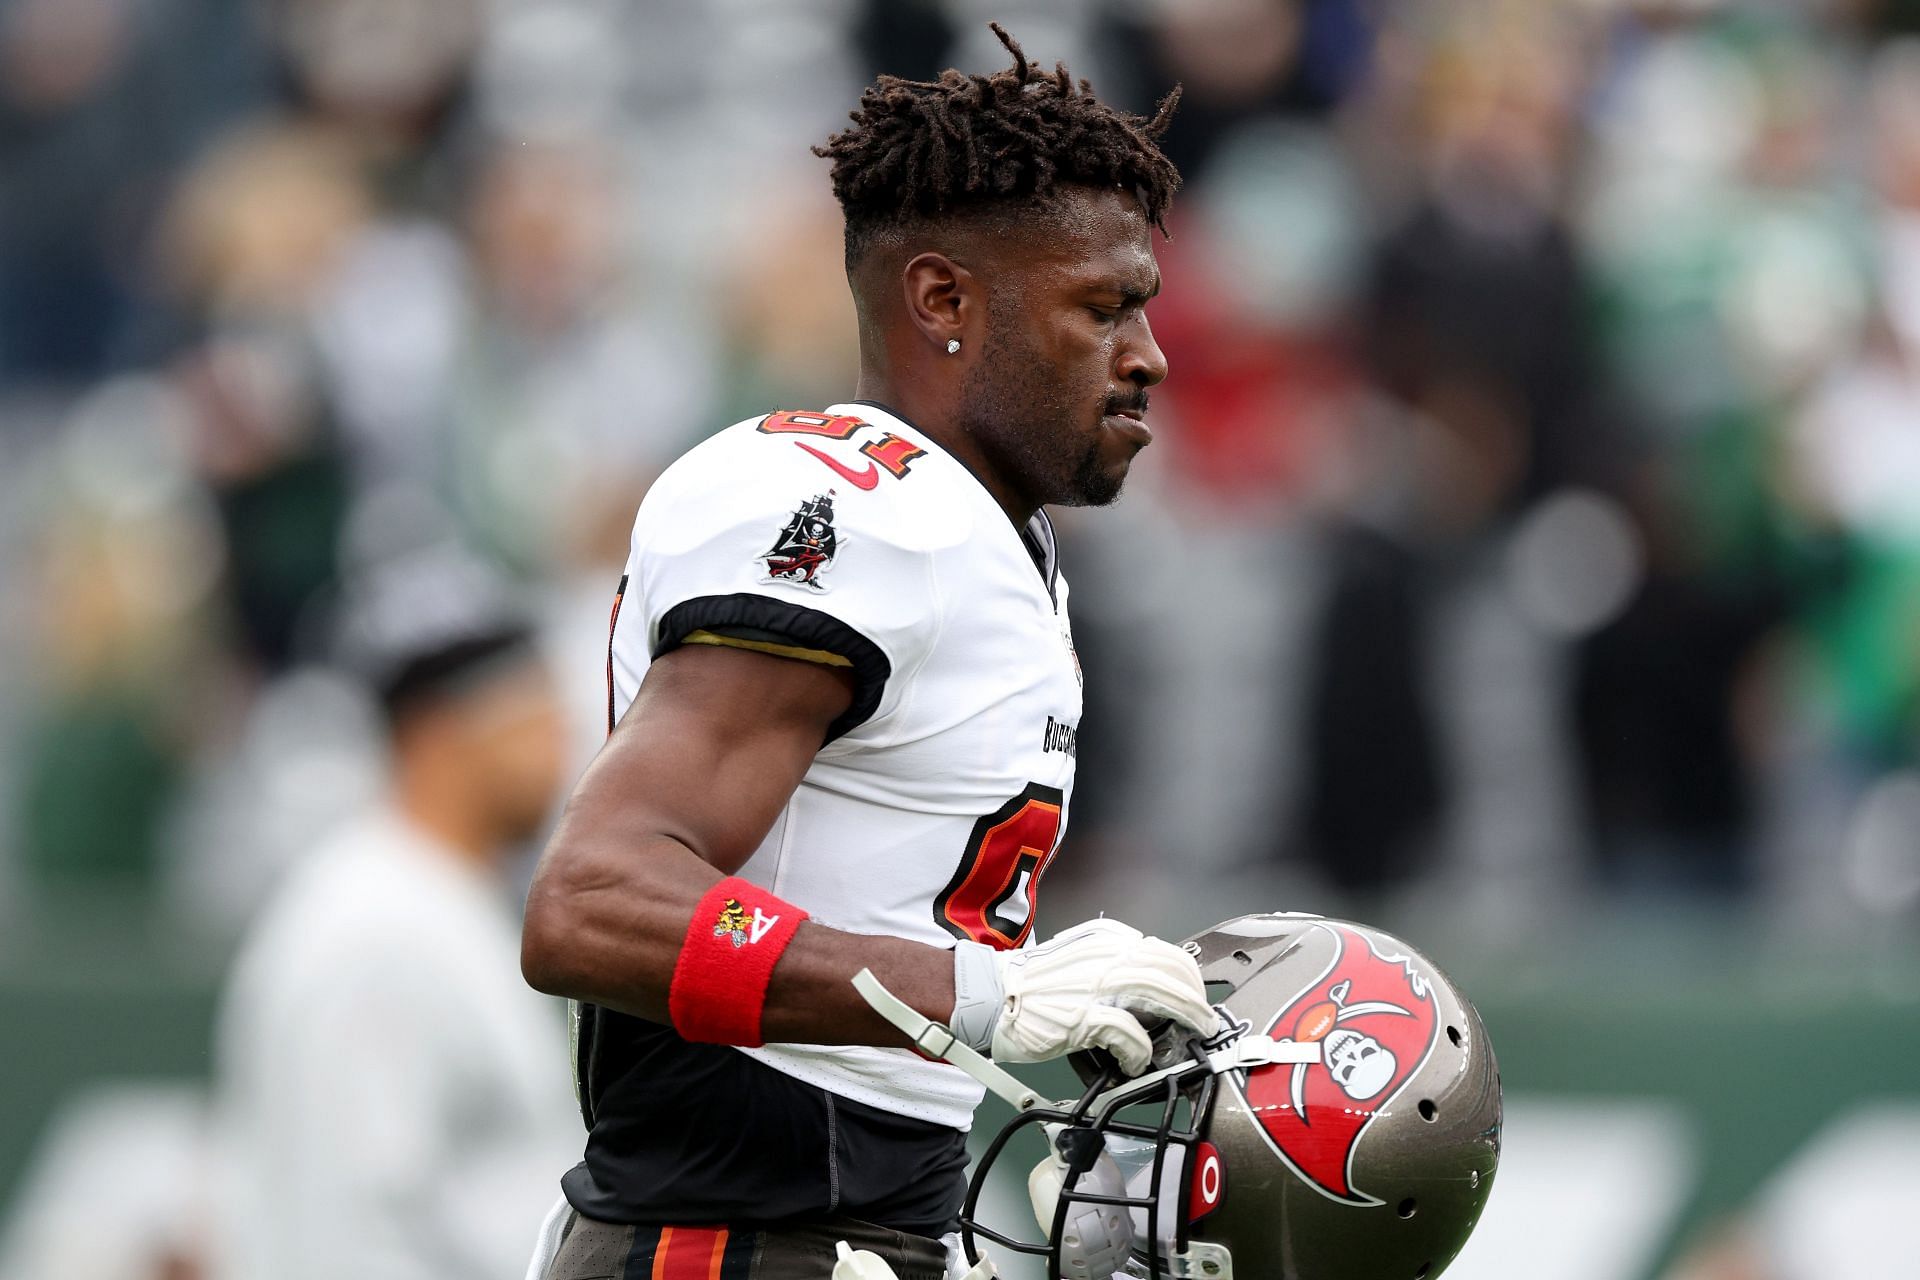 Antonio Brown of the Tampa Bay Buccaneers looks on against the New York Jets